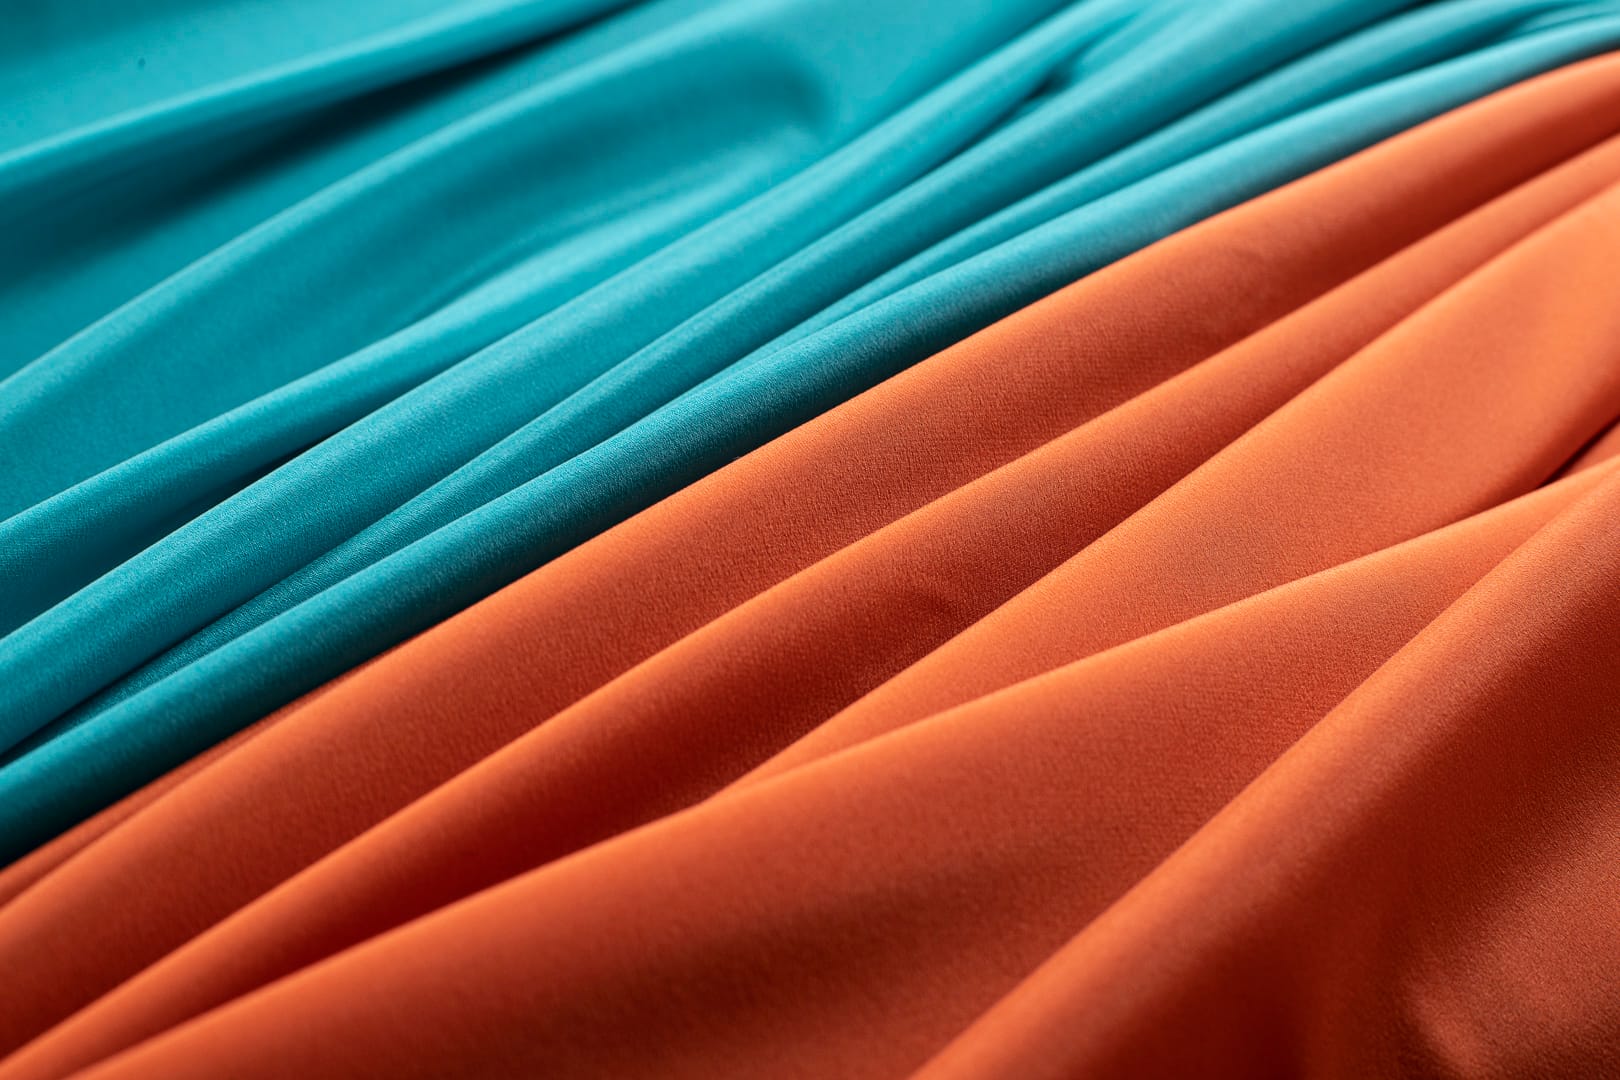 Crêpe de Chine Stretch fabrics for clothing and fashion by the metre